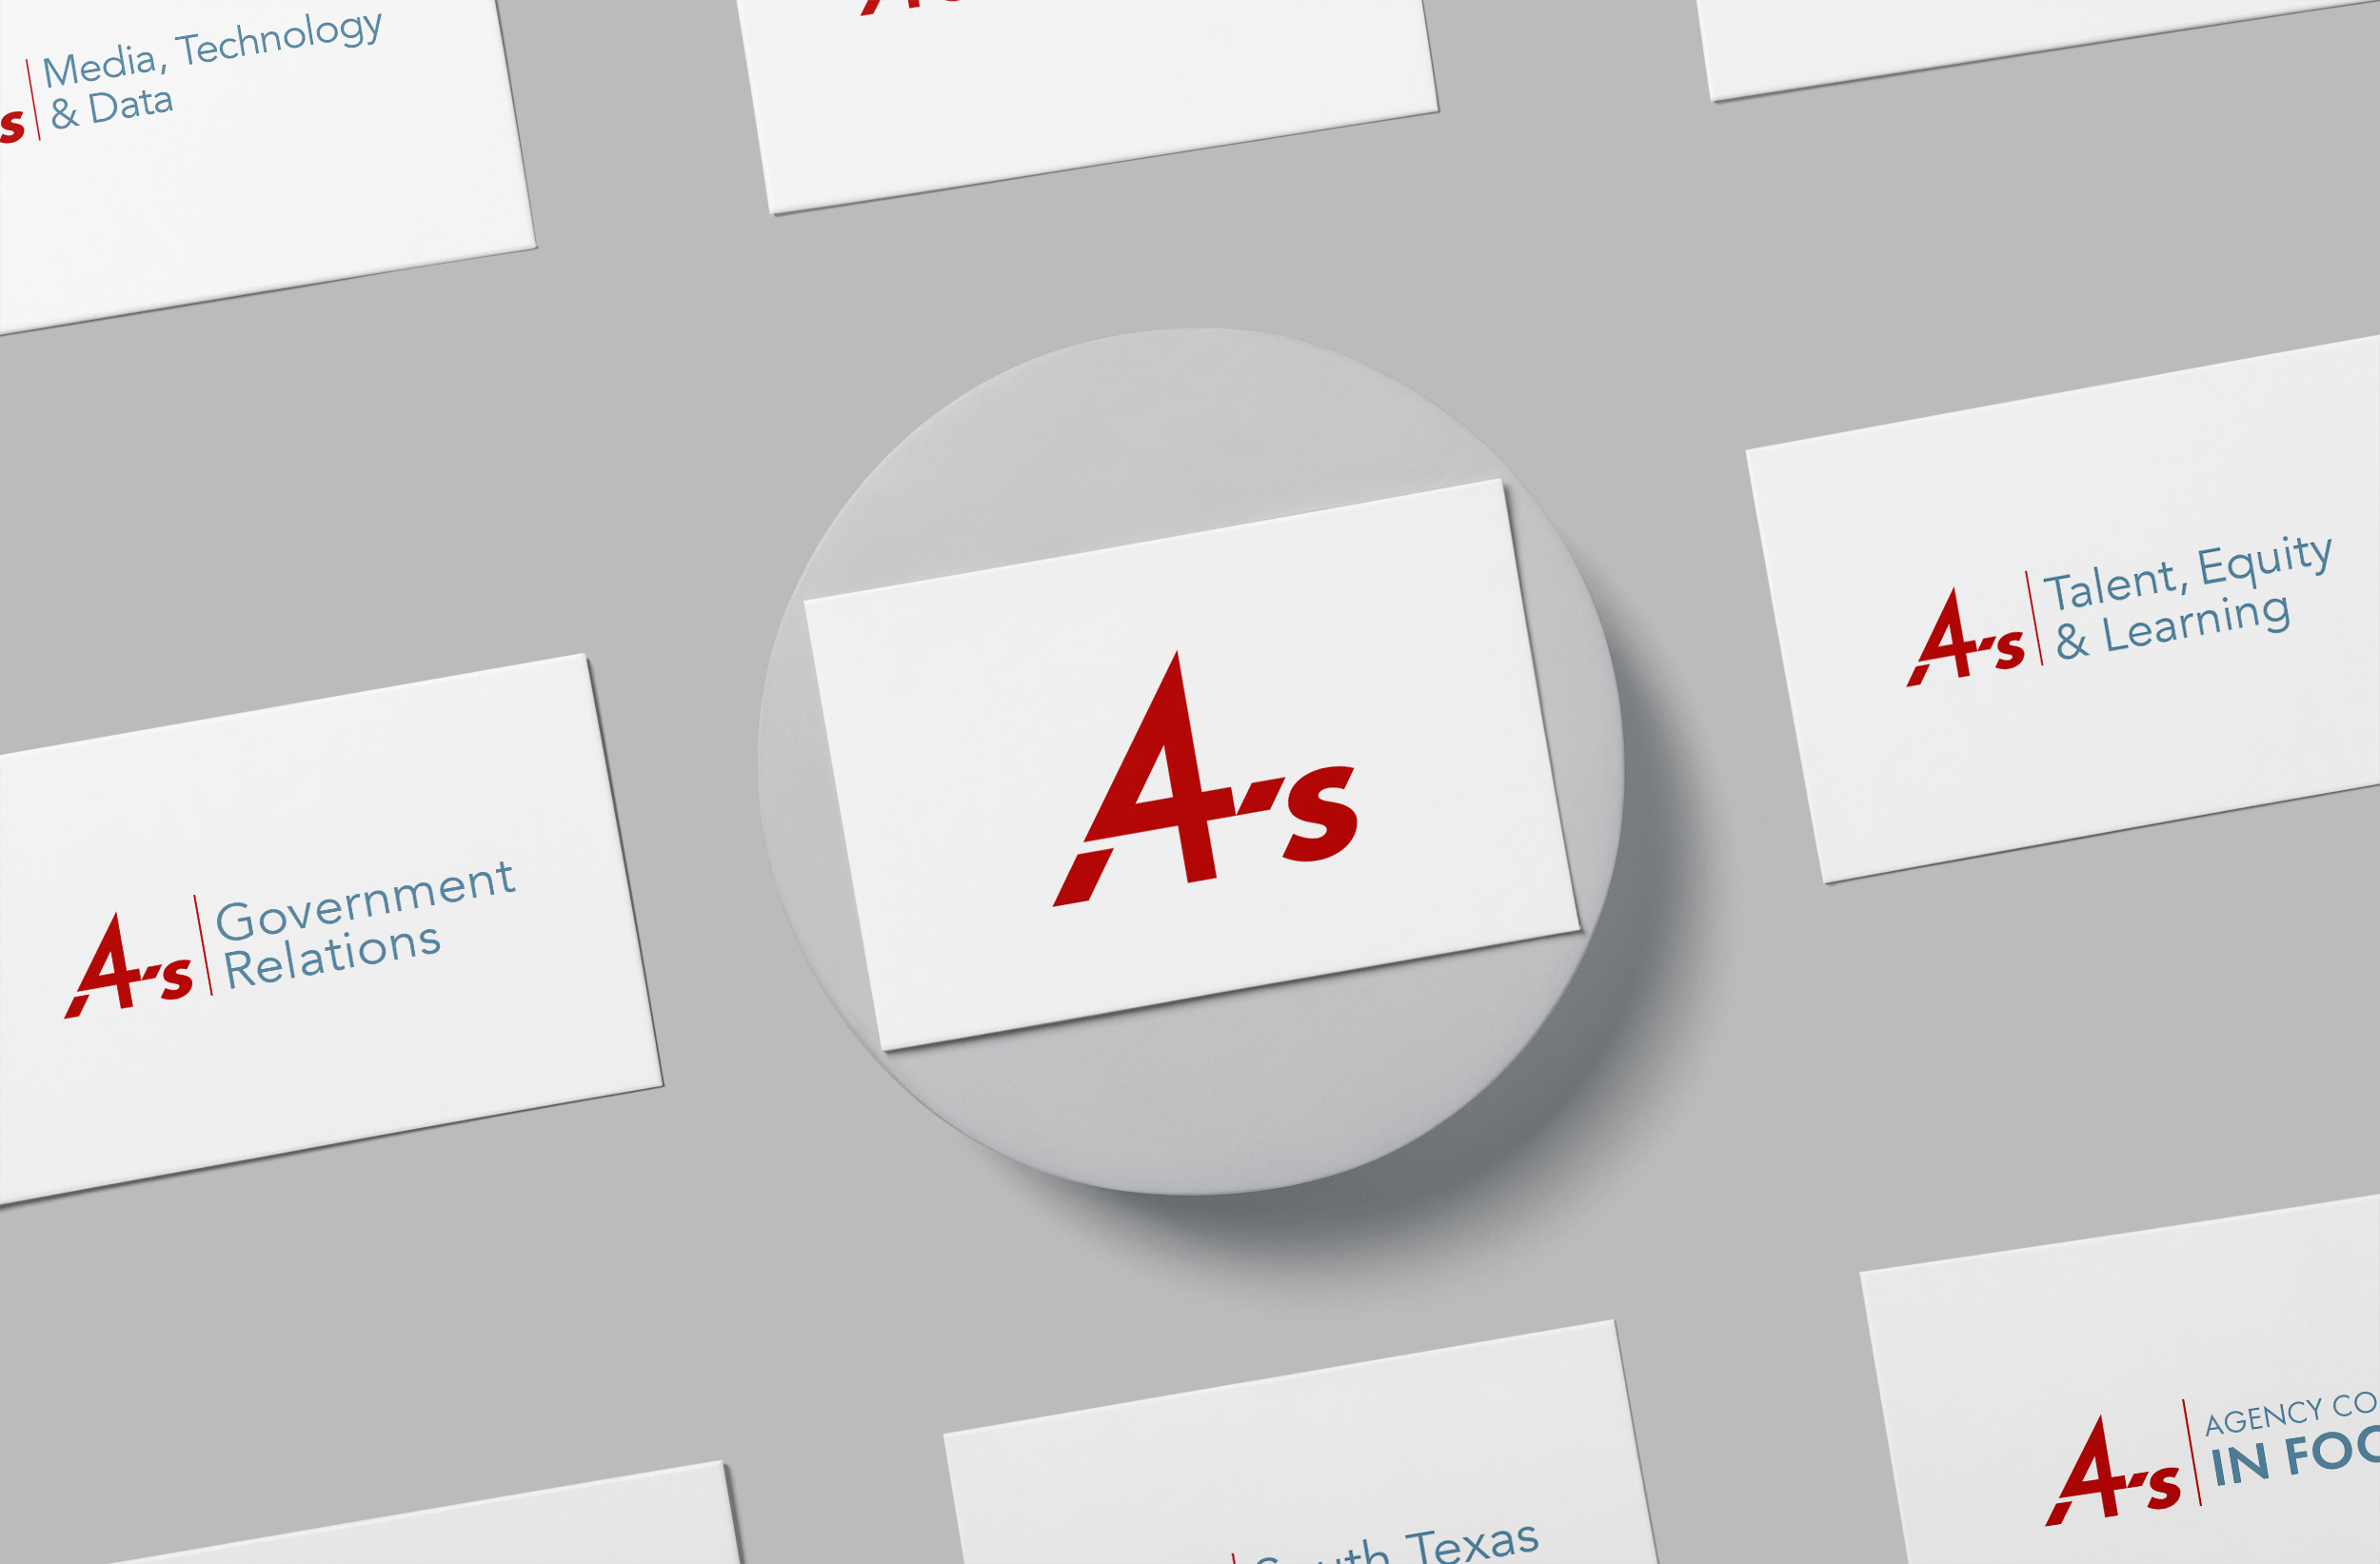 4A's Logo examples